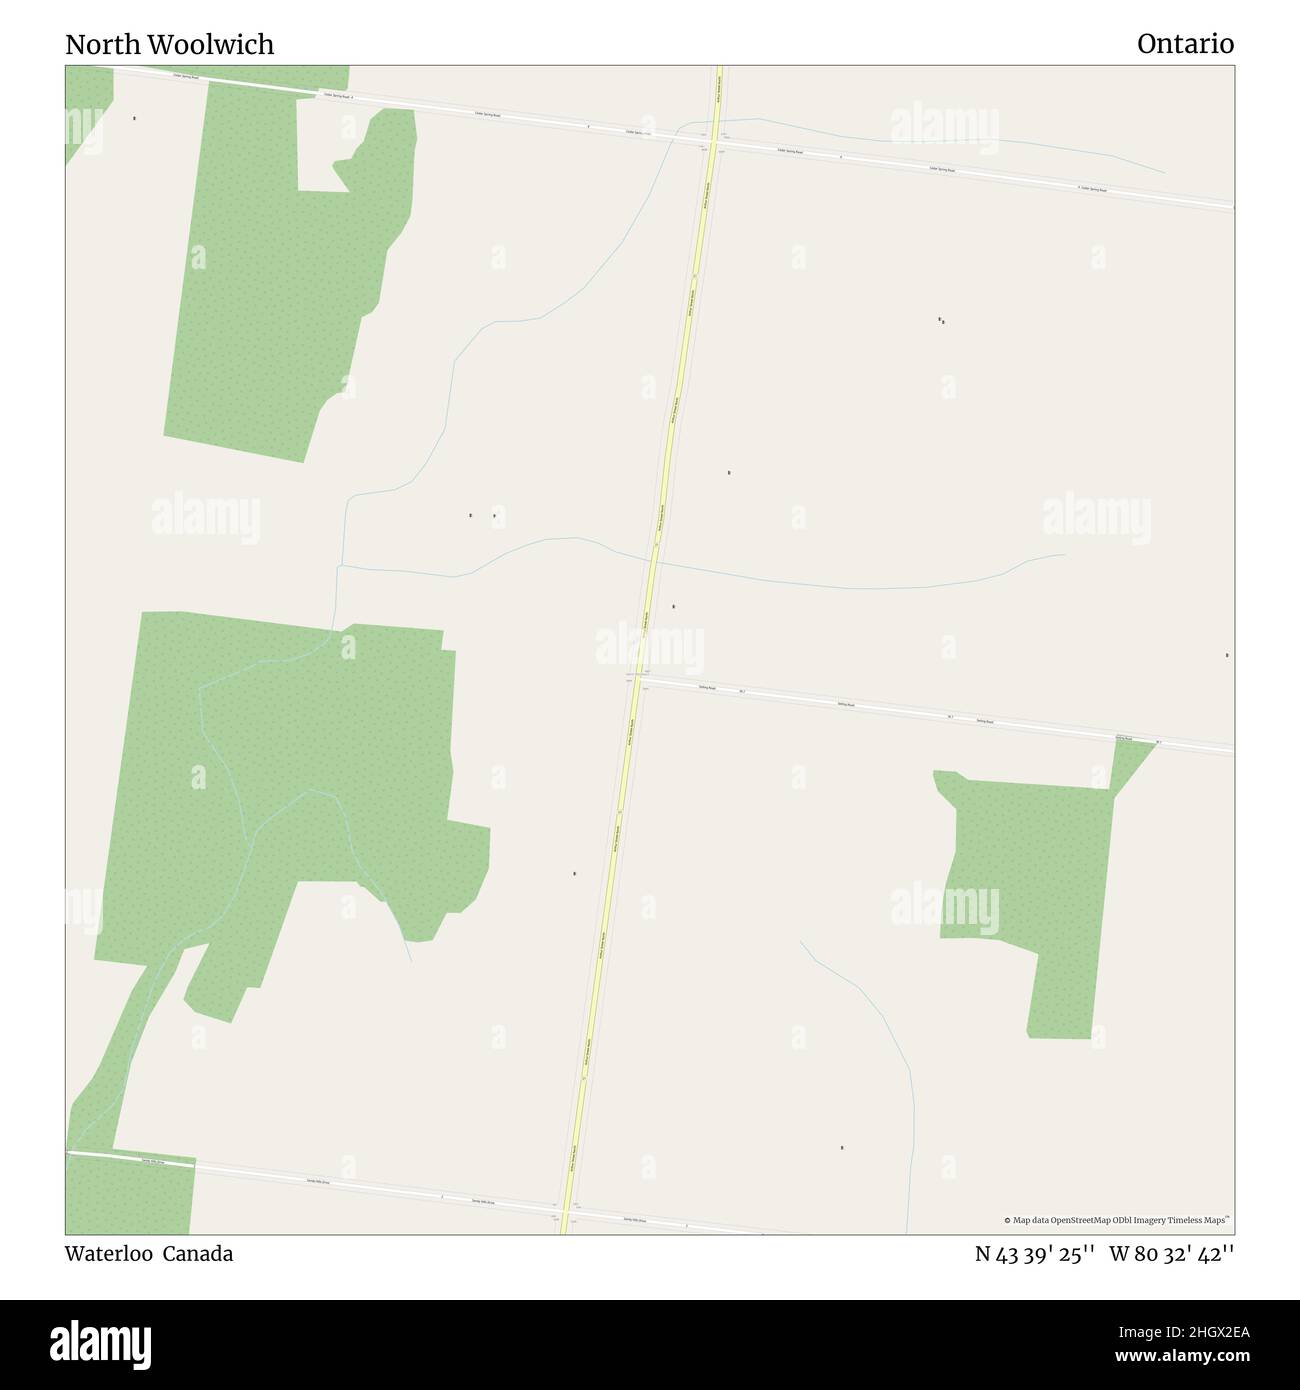 North Woolwich, Waterloo, Canada, Ontario, N 43 39' 25'', W 80 32' 42'', map, Timeless Map published in 2021. Travelers, explorers and adventurers like Florence Nightingale, David Livingstone, Ernest Shackleton, Lewis and Clark and Sherlock Holmes relied on maps to plan travels to the world's most remote corners, Timeless Maps is mapping most locations on the globe, showing the achievement of great dreams Stock Photo